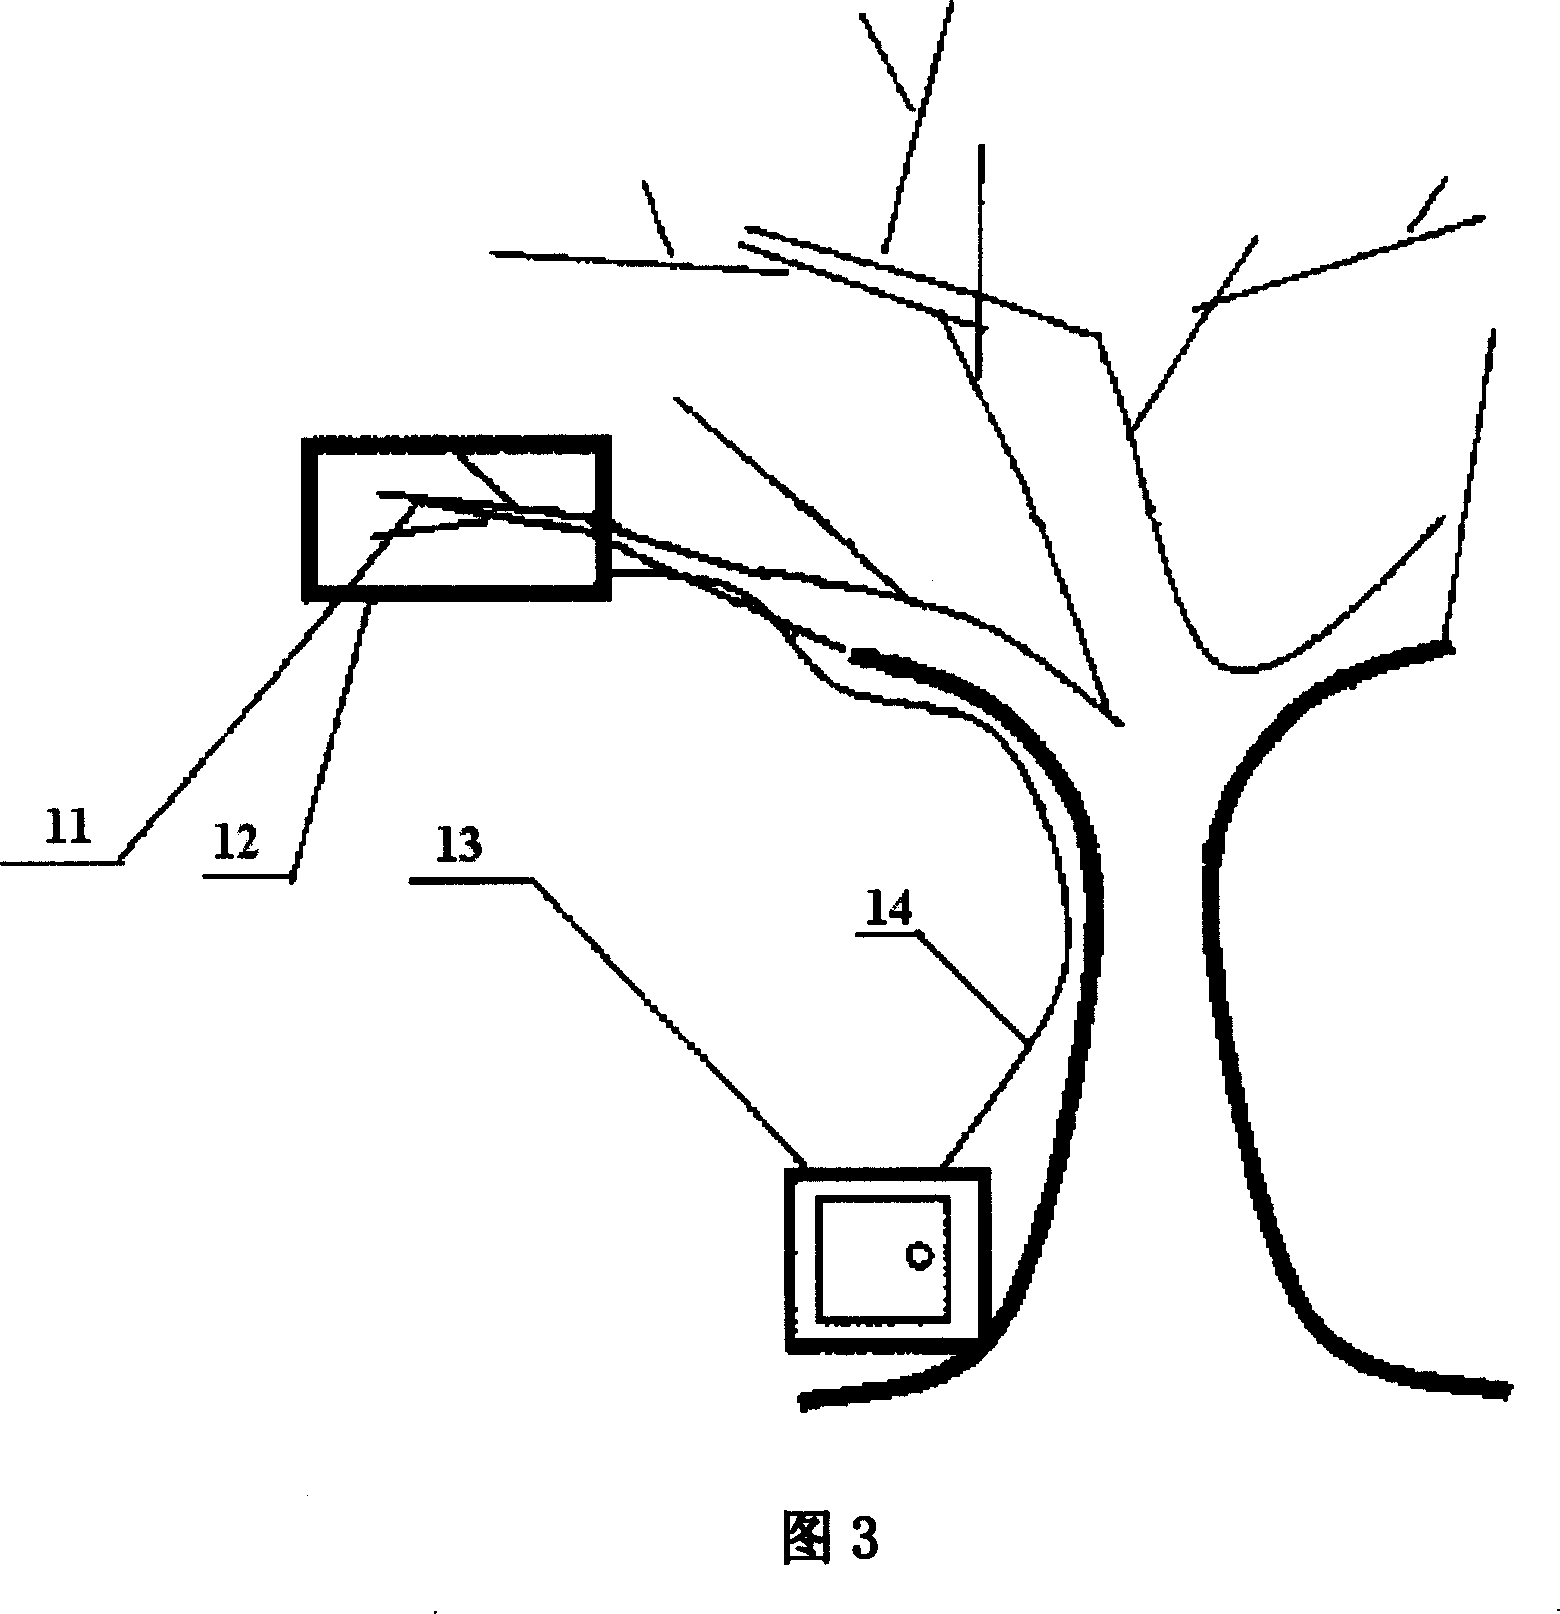 Heating treatment device for non in vitro branch bud of tree